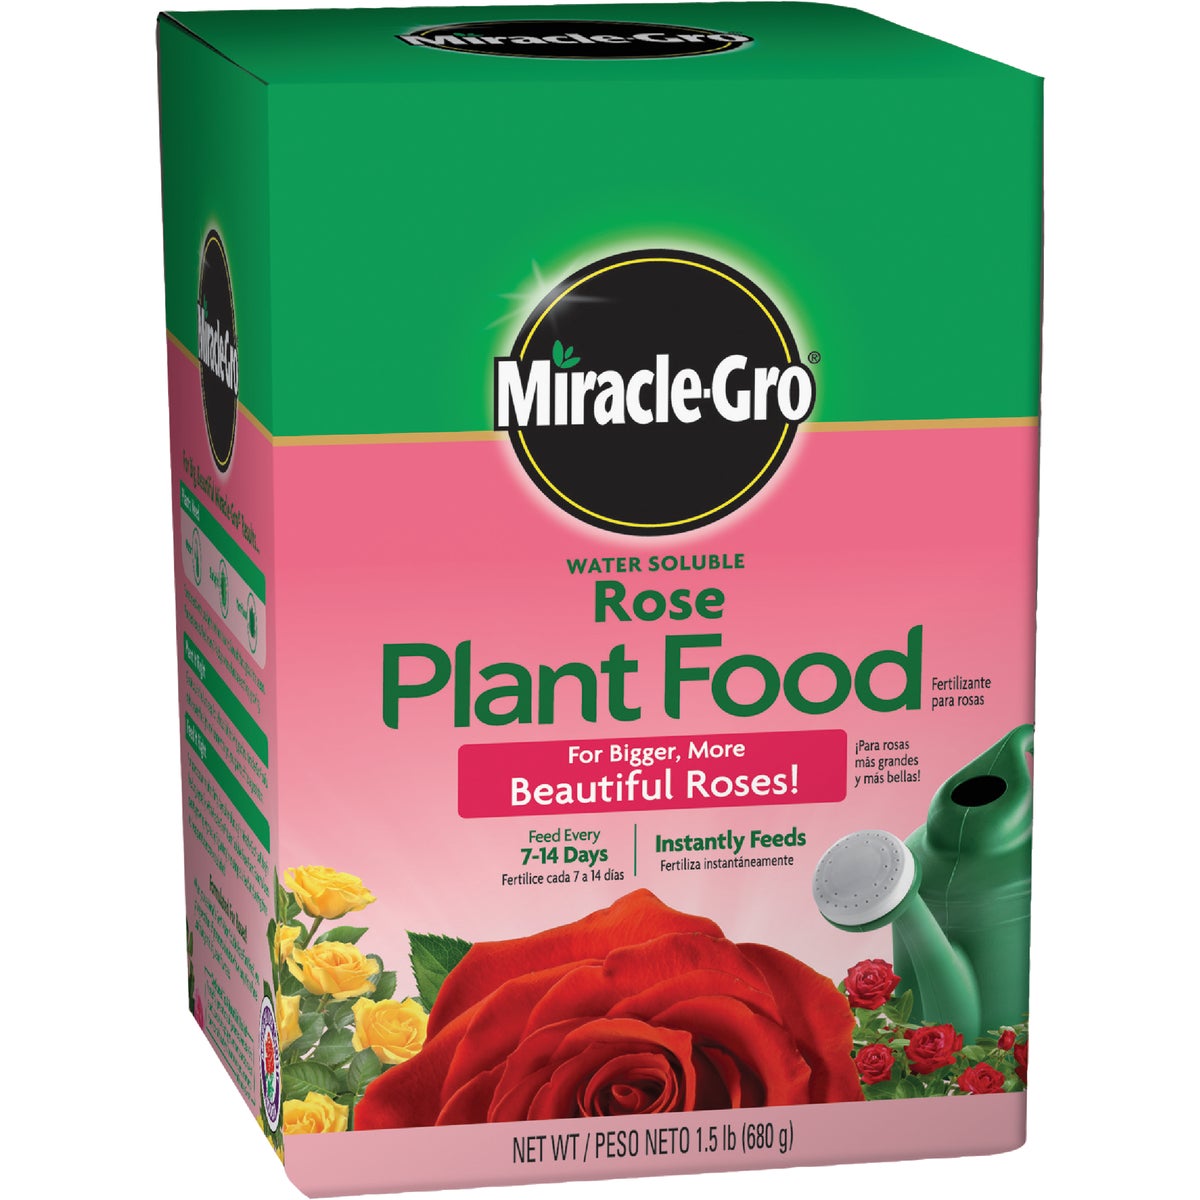 Miracle-Gro 2000221 Miracle-Gro 1.5 Lb. Water Soluble Rose Plant Food 2000221